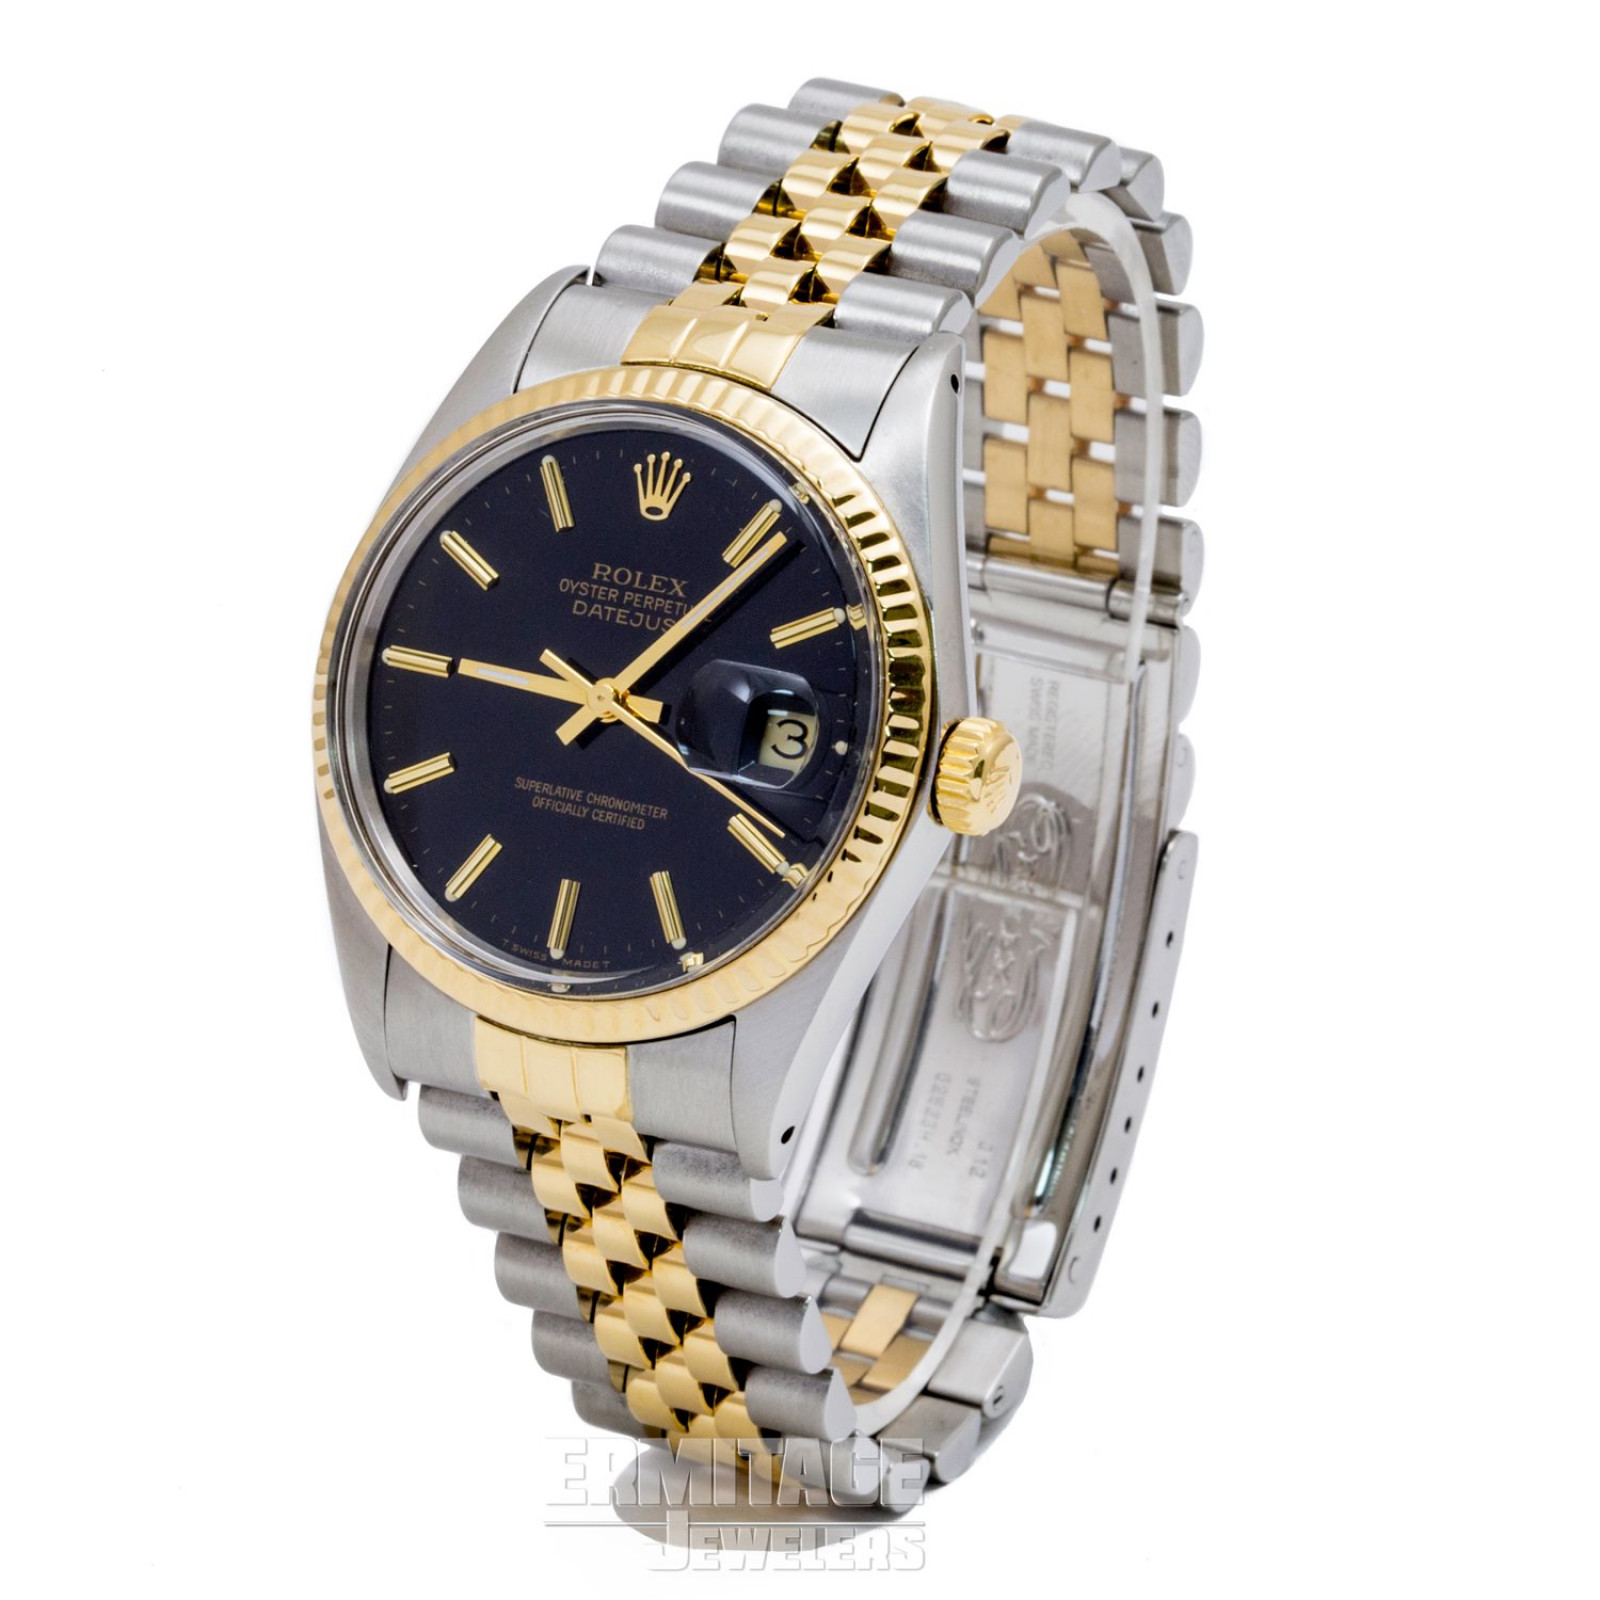 36 mm Rolex Datejust 16013 Gold & Steel on Jubilee with Black Dial